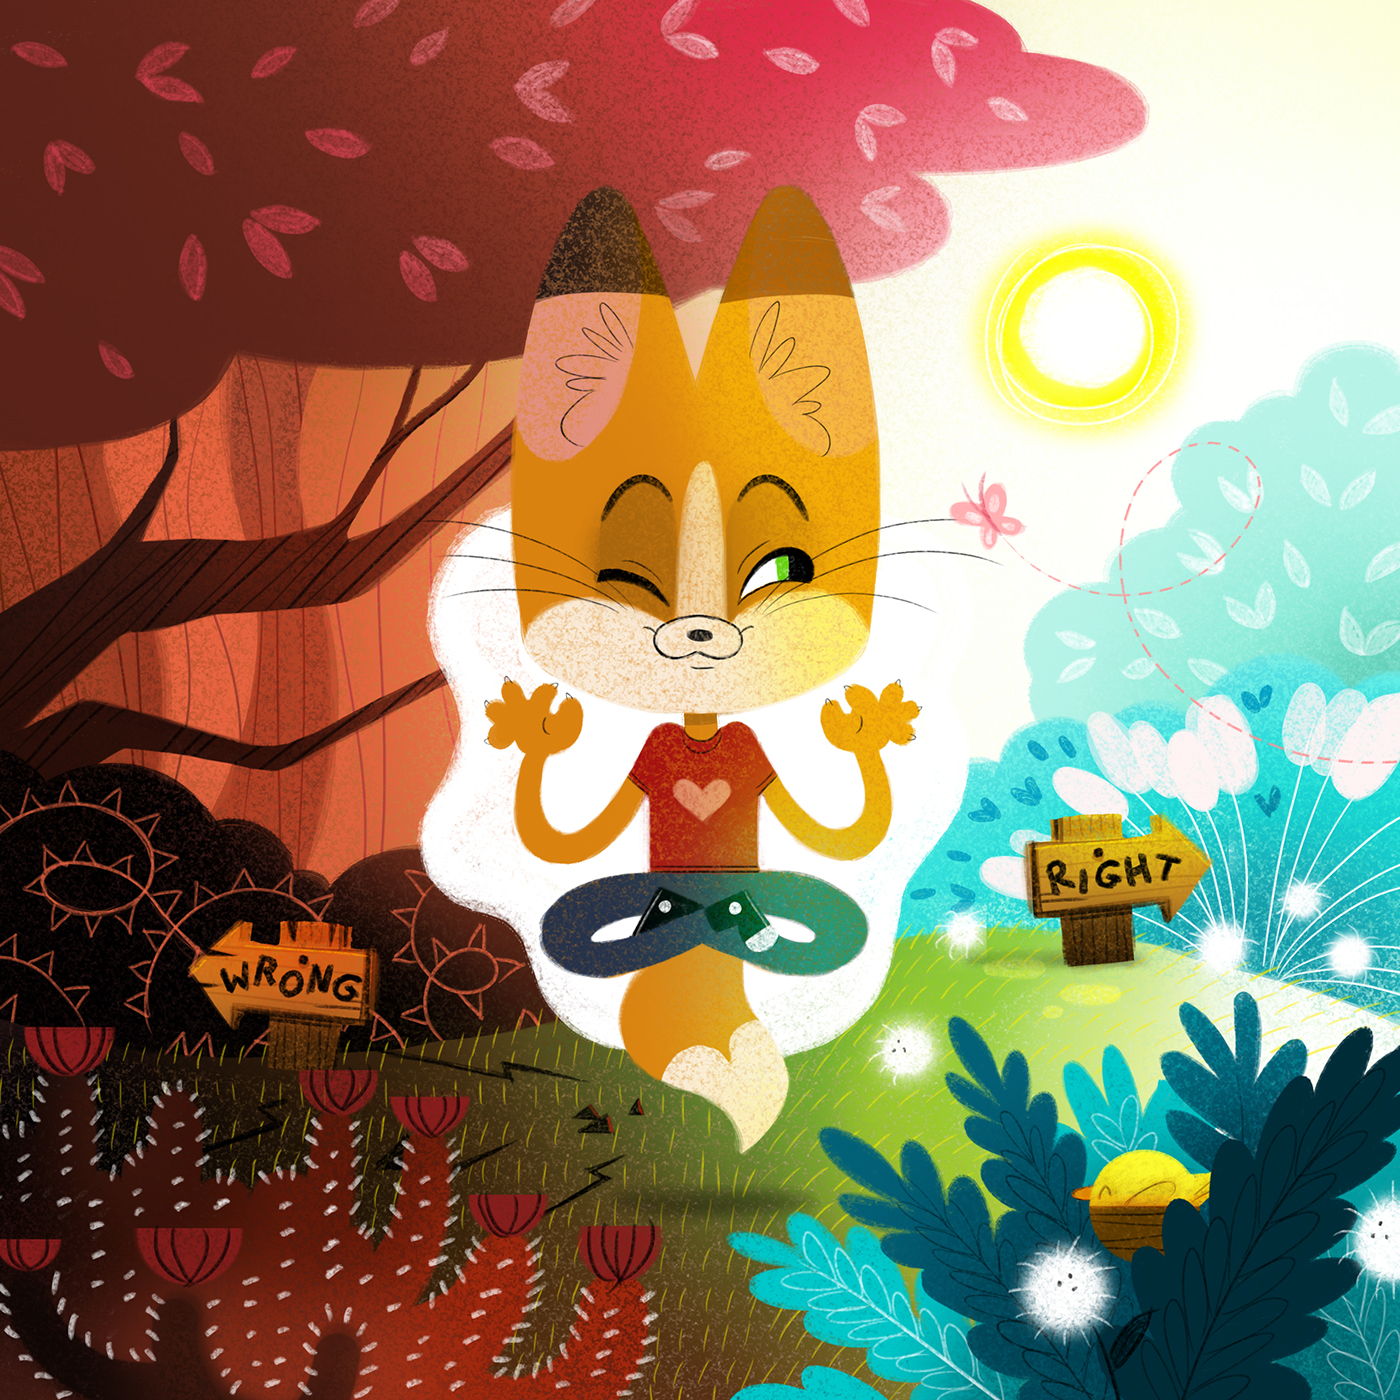 FOX right Wrong meadow path think heart Nature meditate visualdevelopment